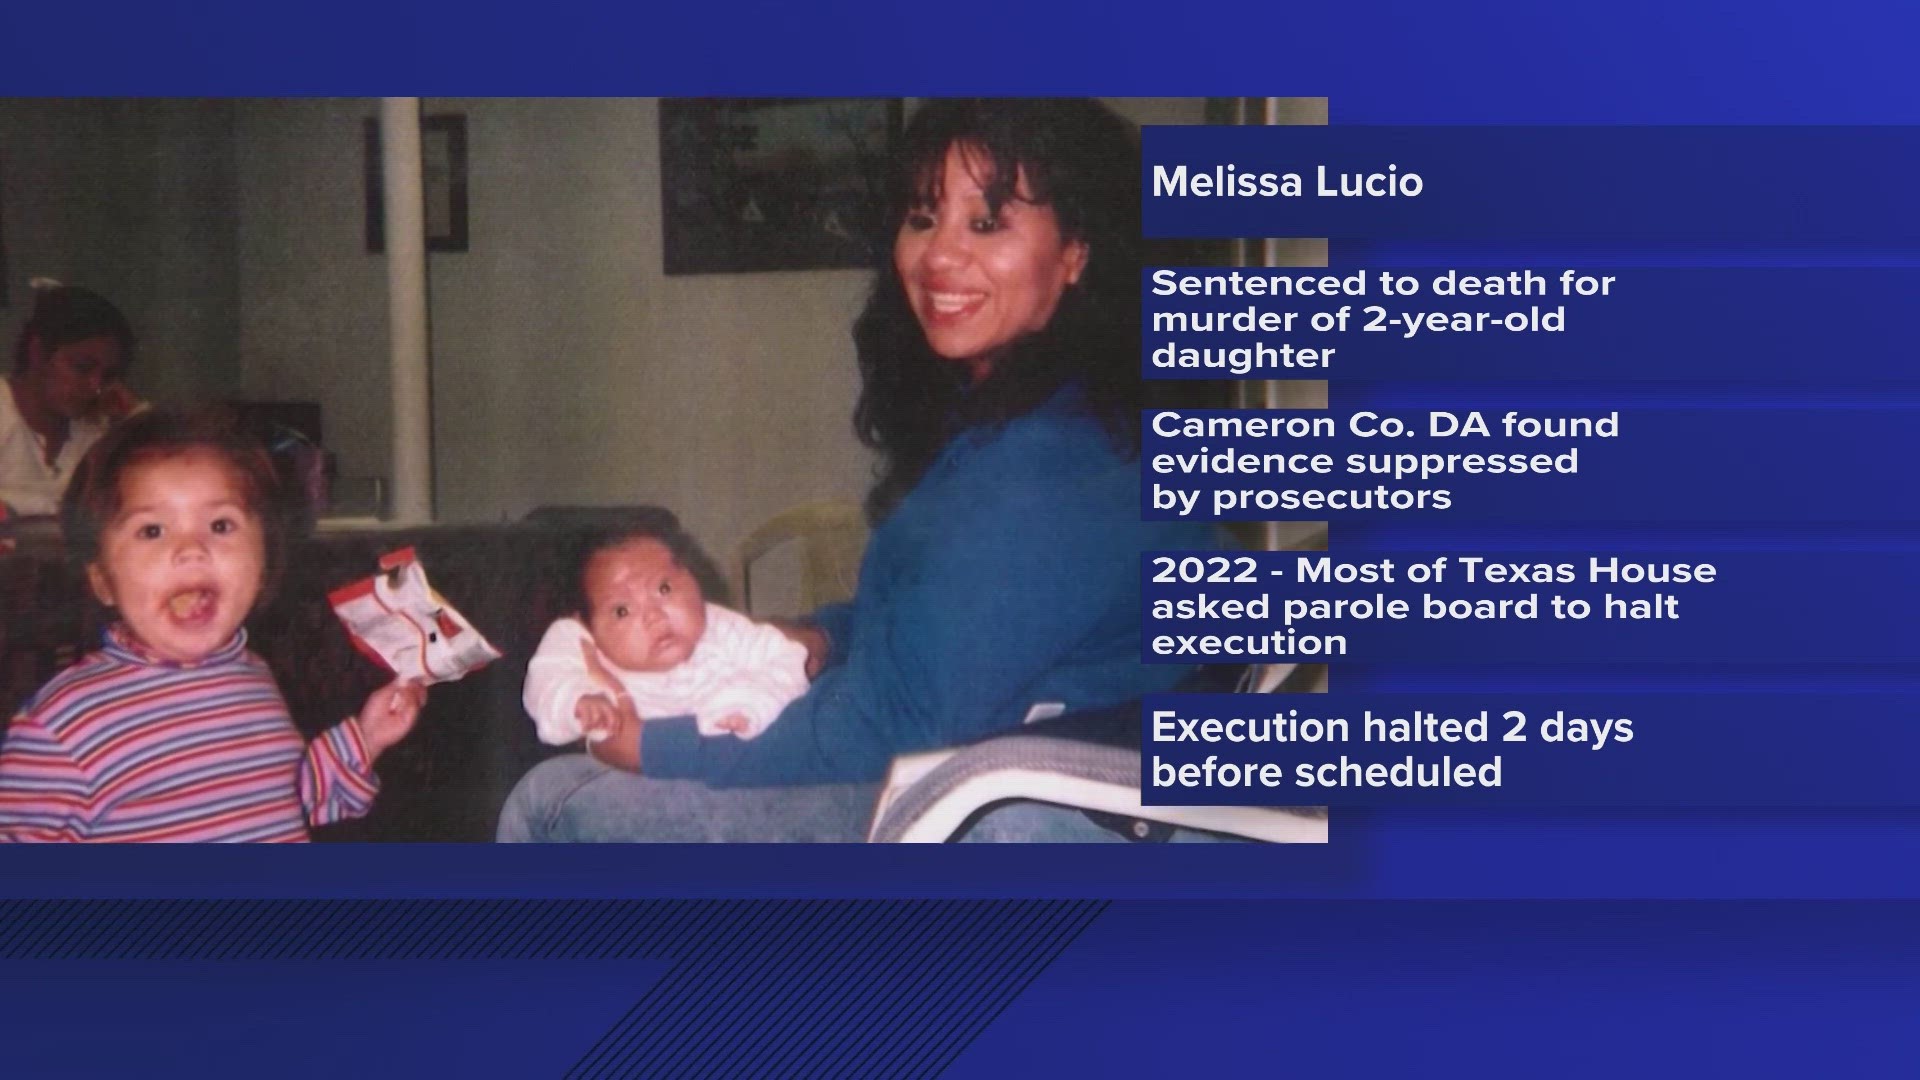 A district judge is recommending the overturning of the death sentence for Melissa Lucio, a woman who was convicted of killing her 2-year-old daughter in 2008.